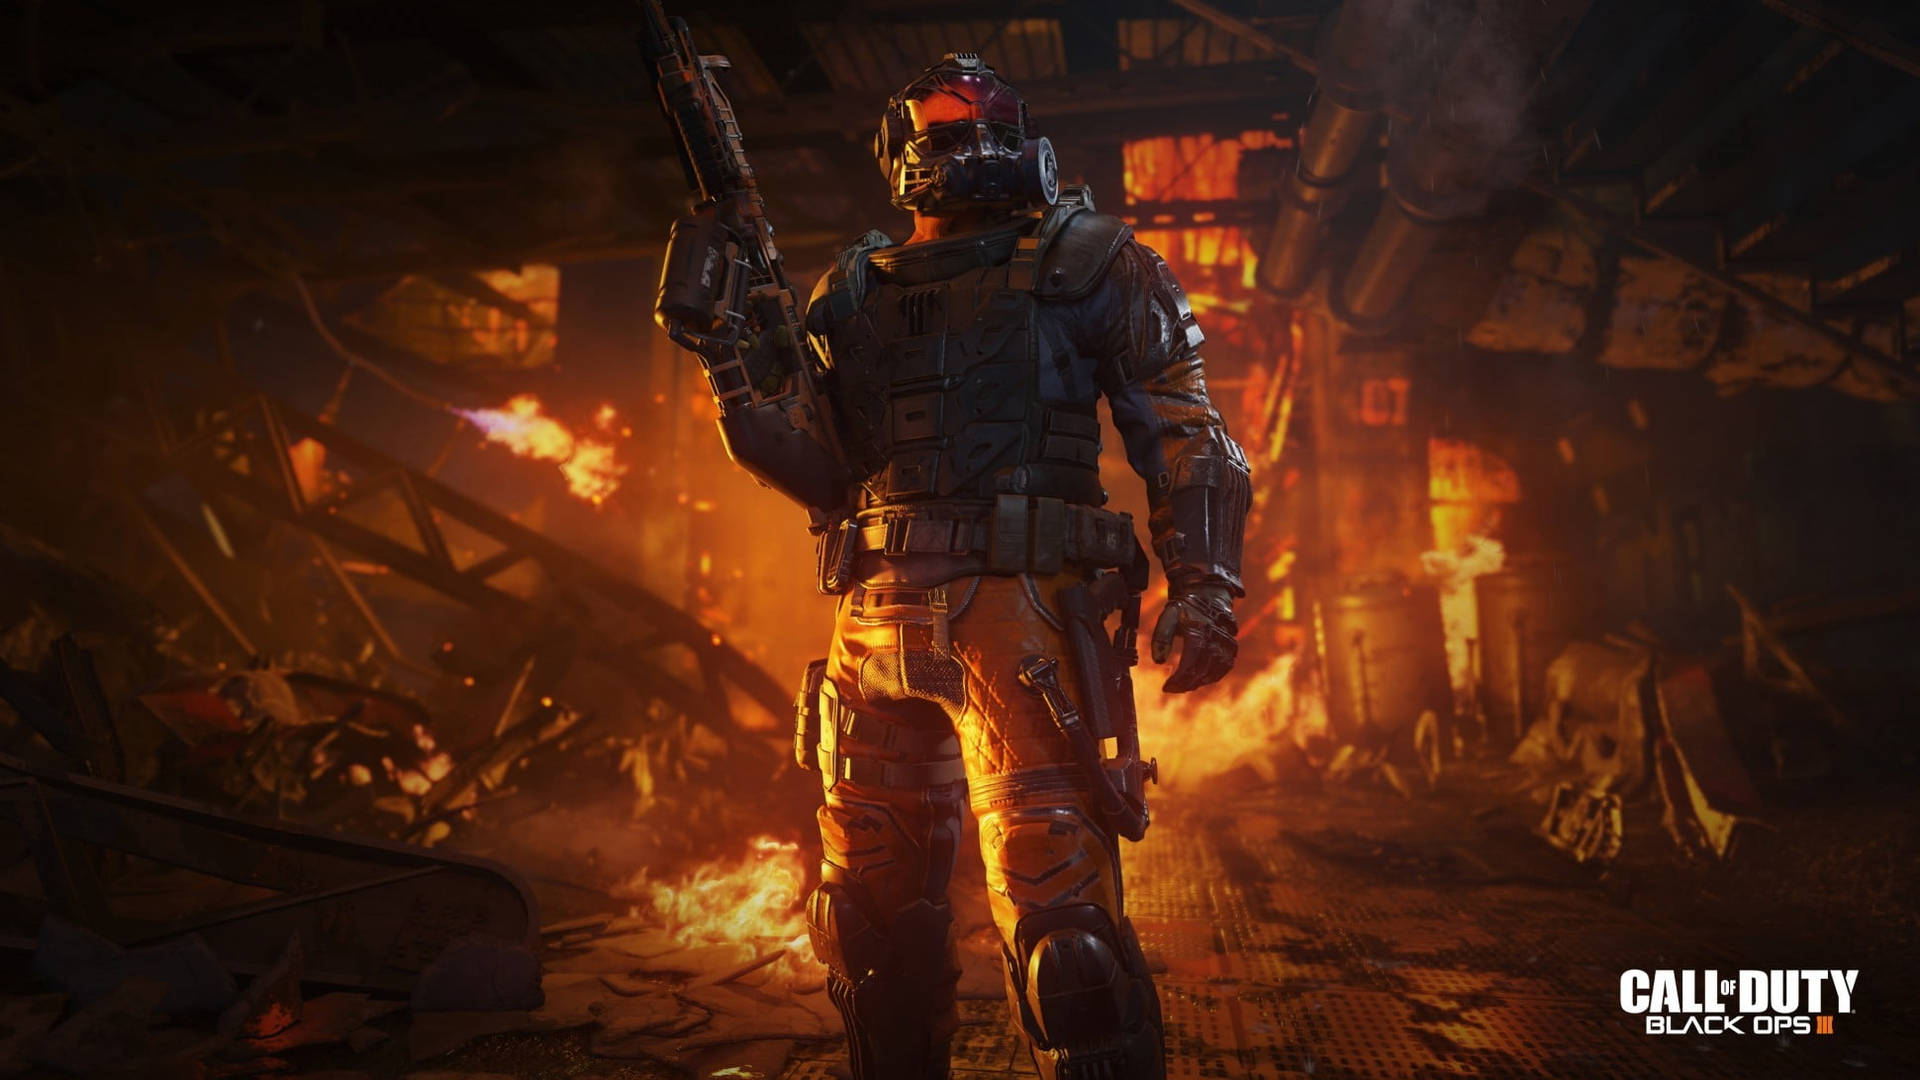 Download Call Of Duty Black Ops 3 Wallpaper 